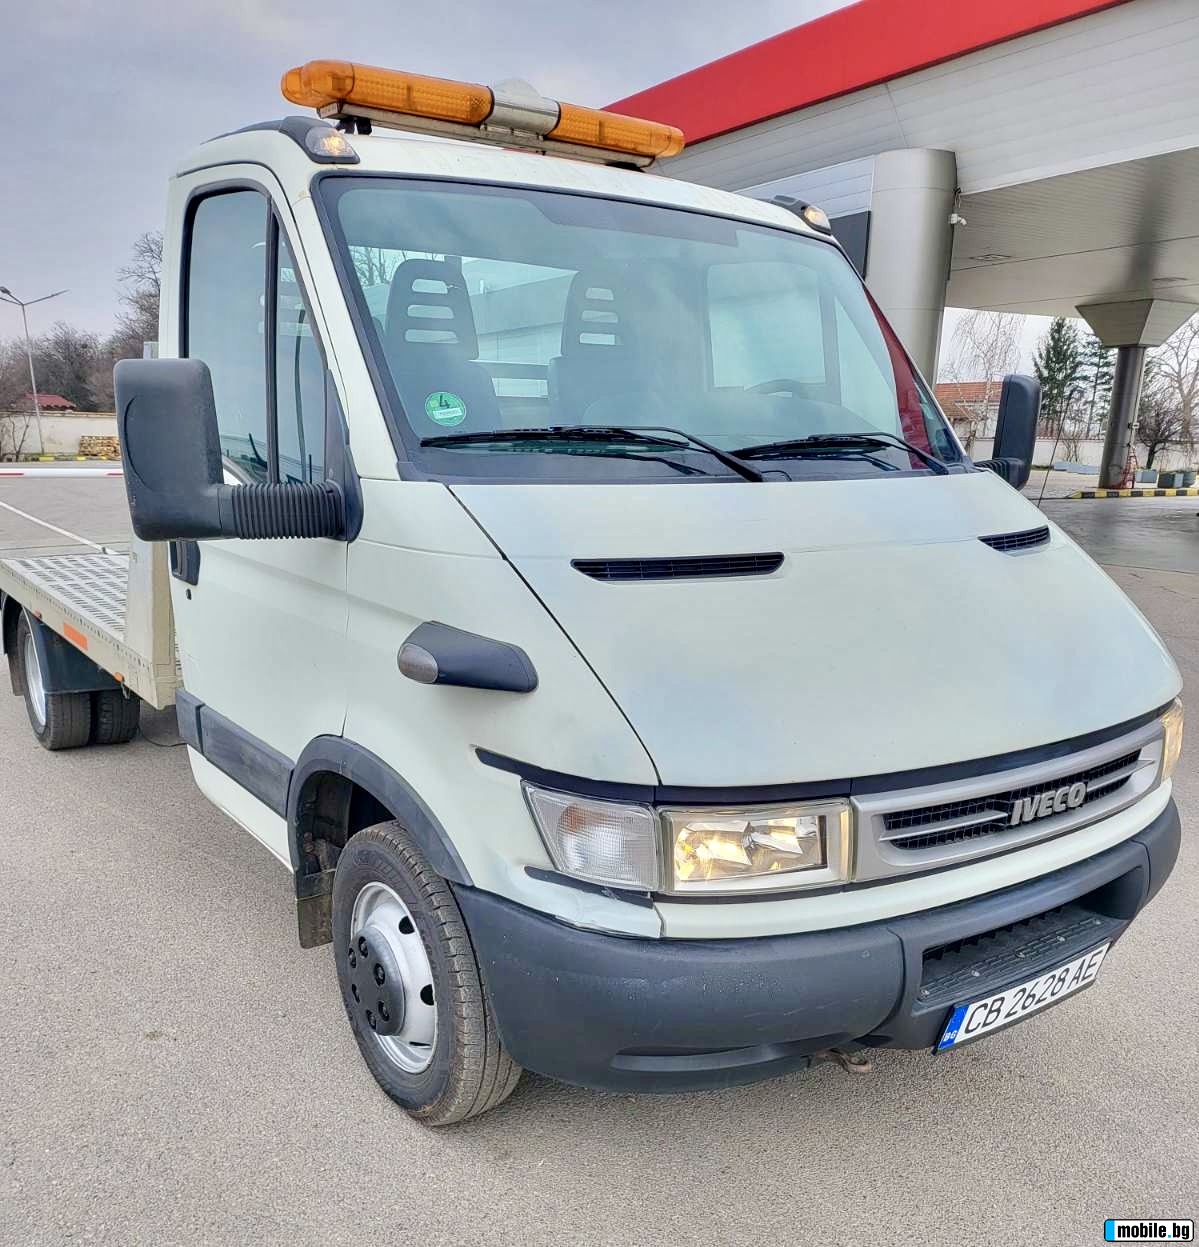 Iveco Daily 5014 3.0D    | Mobile.bg   1